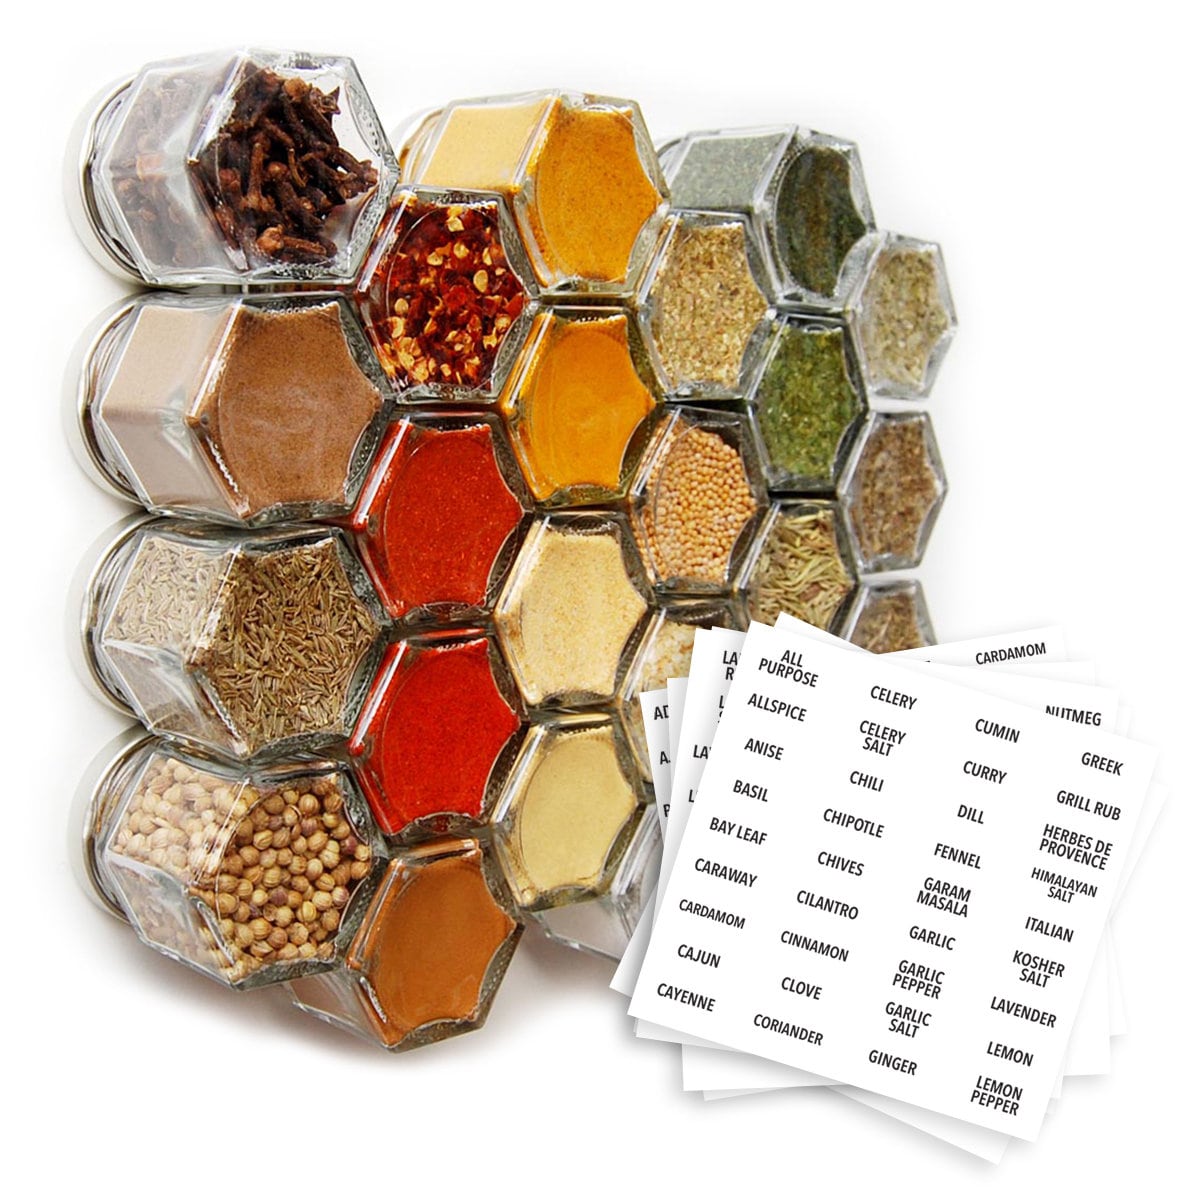 Gneiss Spice DIY Wall Hanging Magnetic Spice Rack (24 Small Jars, Silver Lids, 20x10 Stainless Plate)